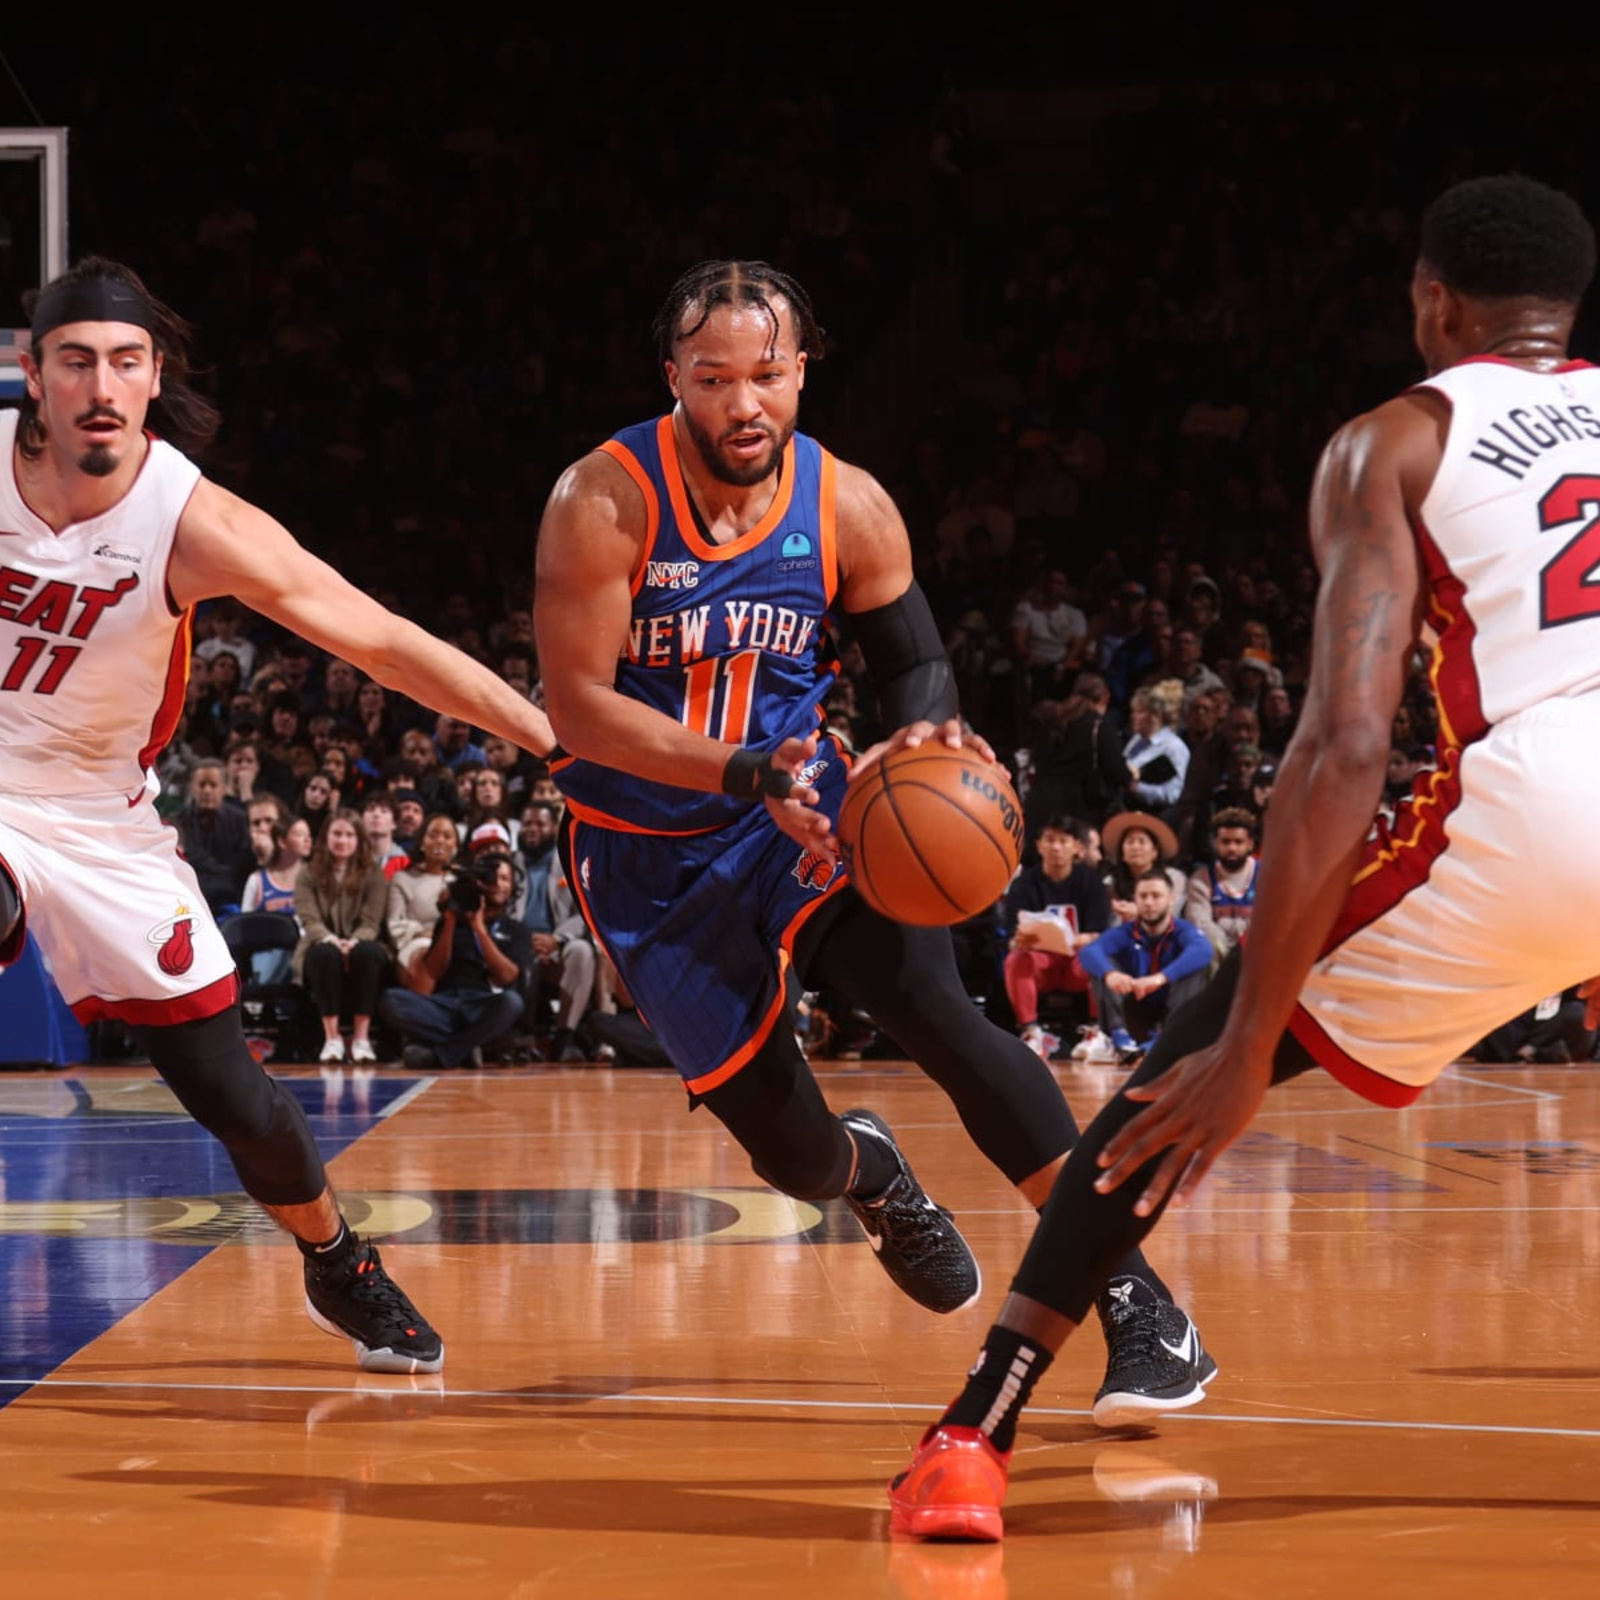 This week in Knicks history: Knicks eliminate Heat for the third